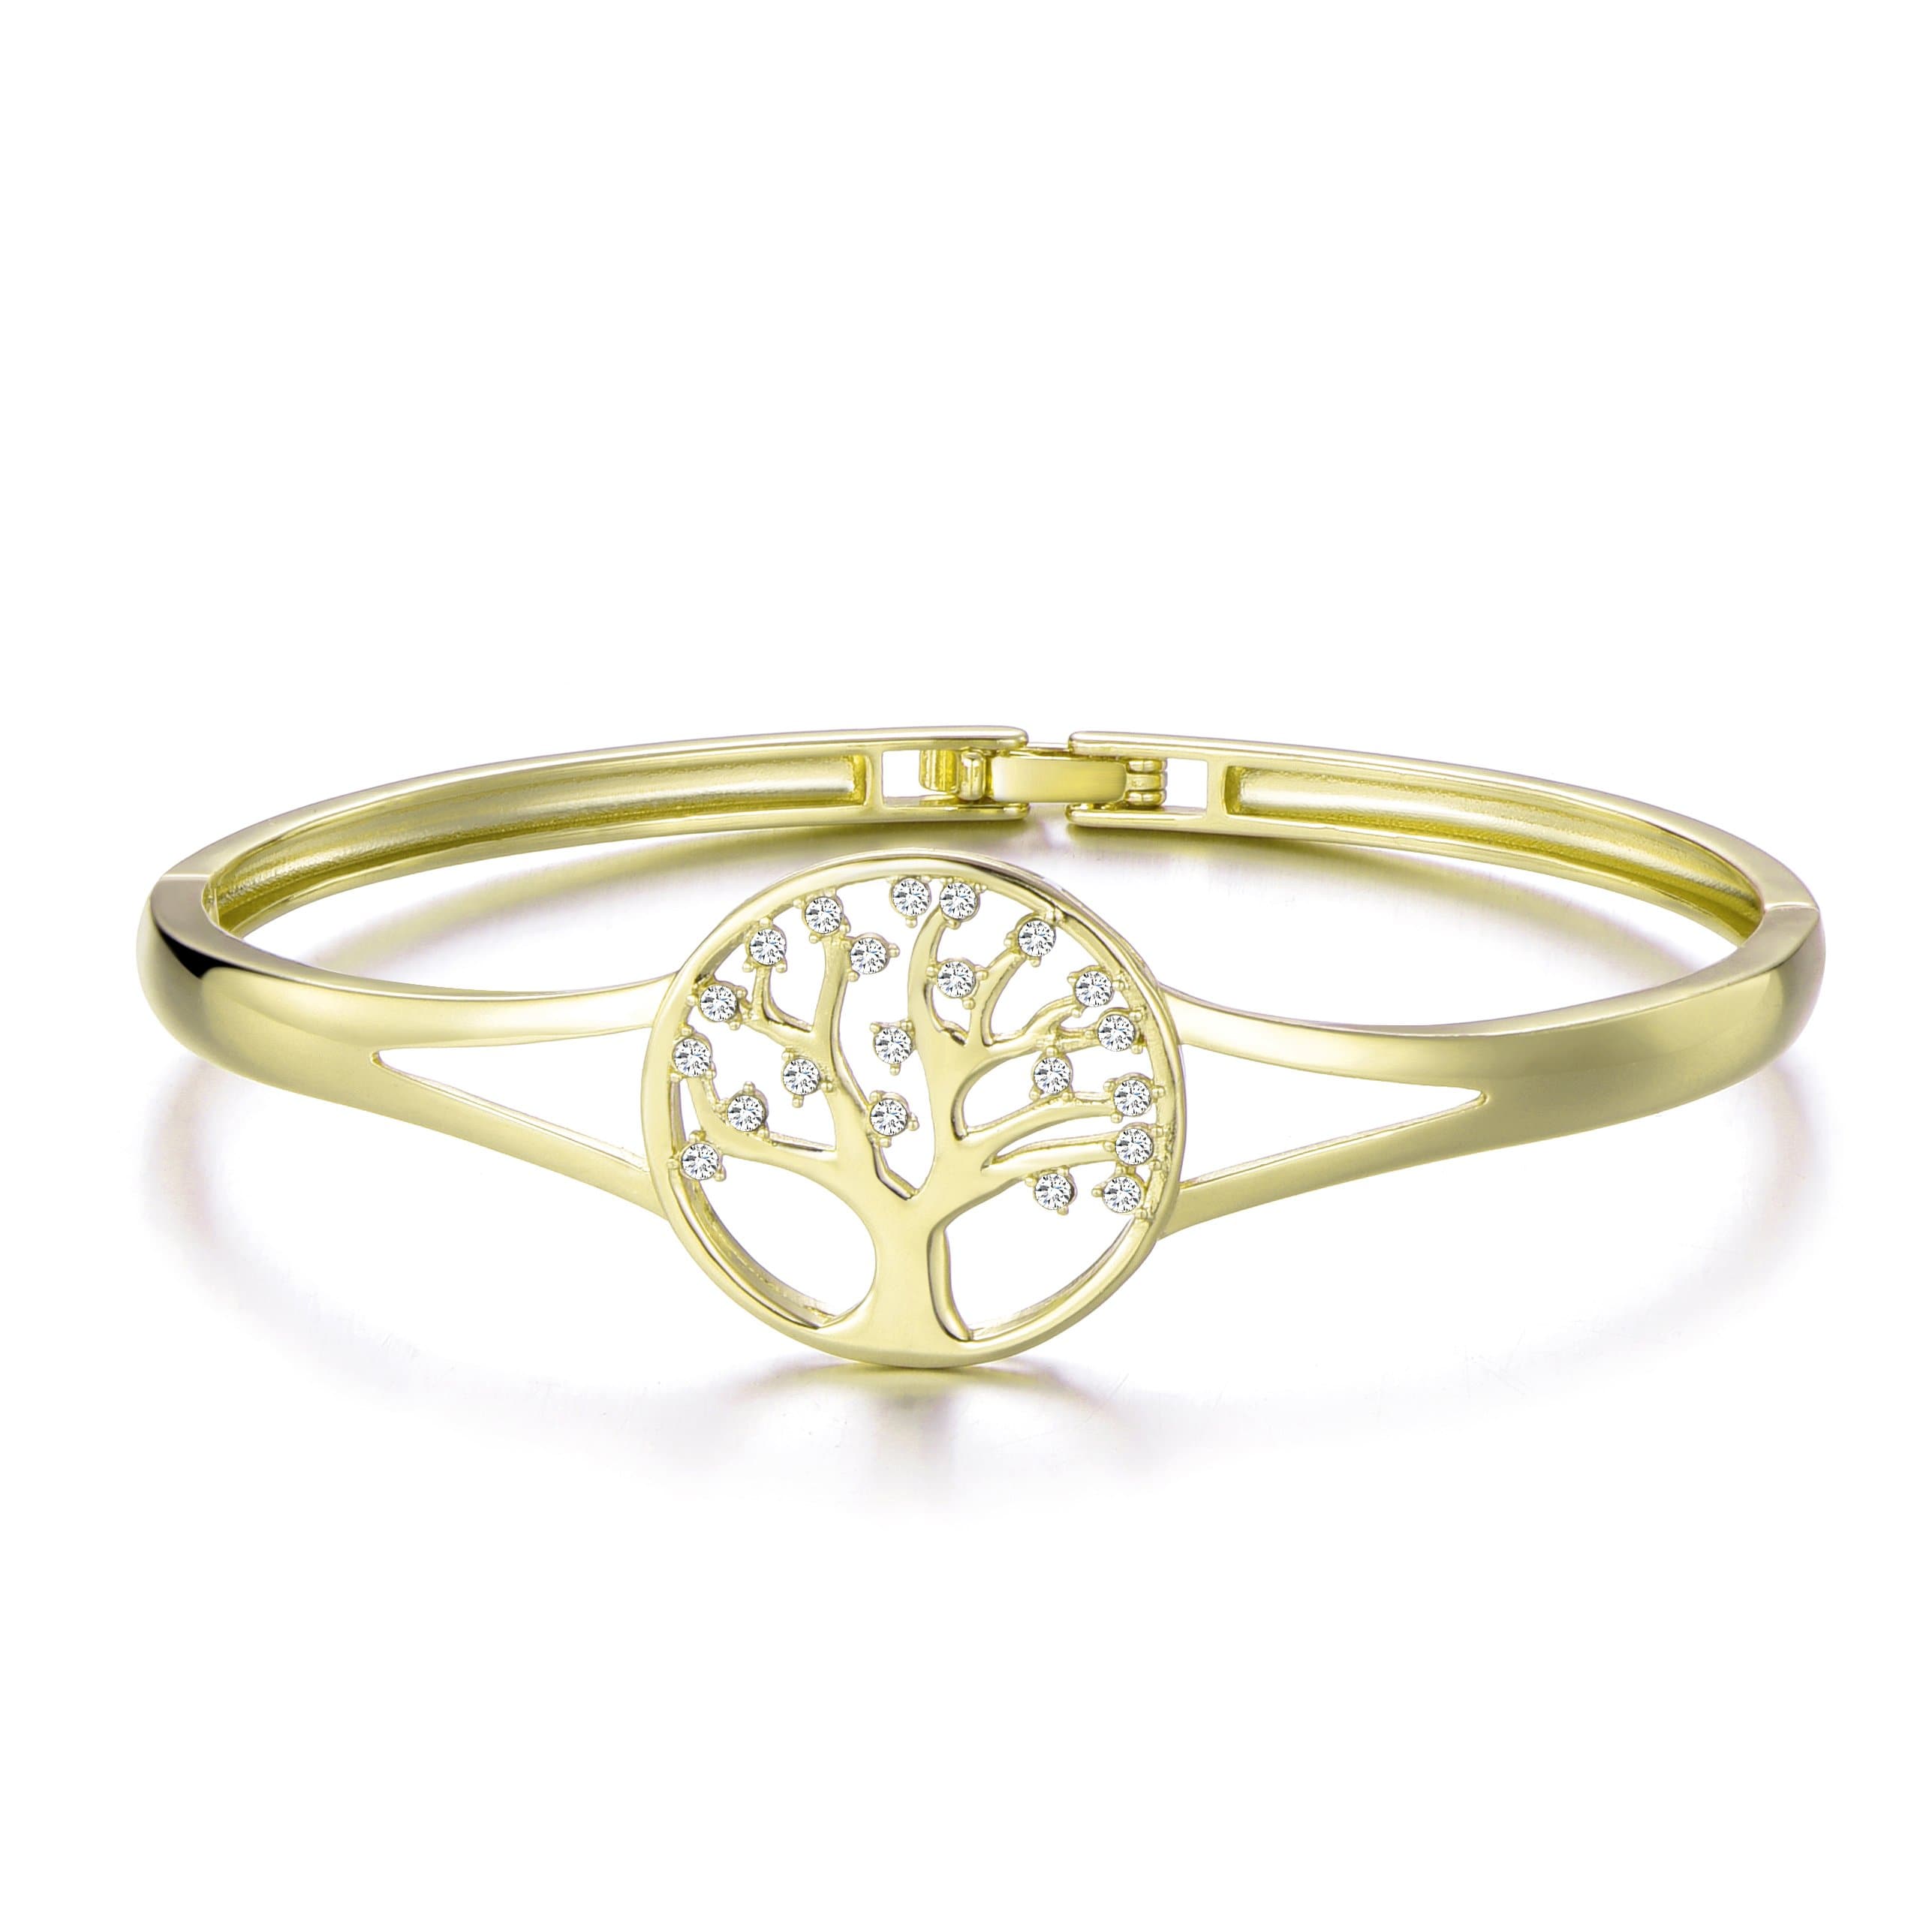 Gold Plated Tree of Life Cuff Bangle Created with Zircondia® Crystals by Philip Jones Jewellery